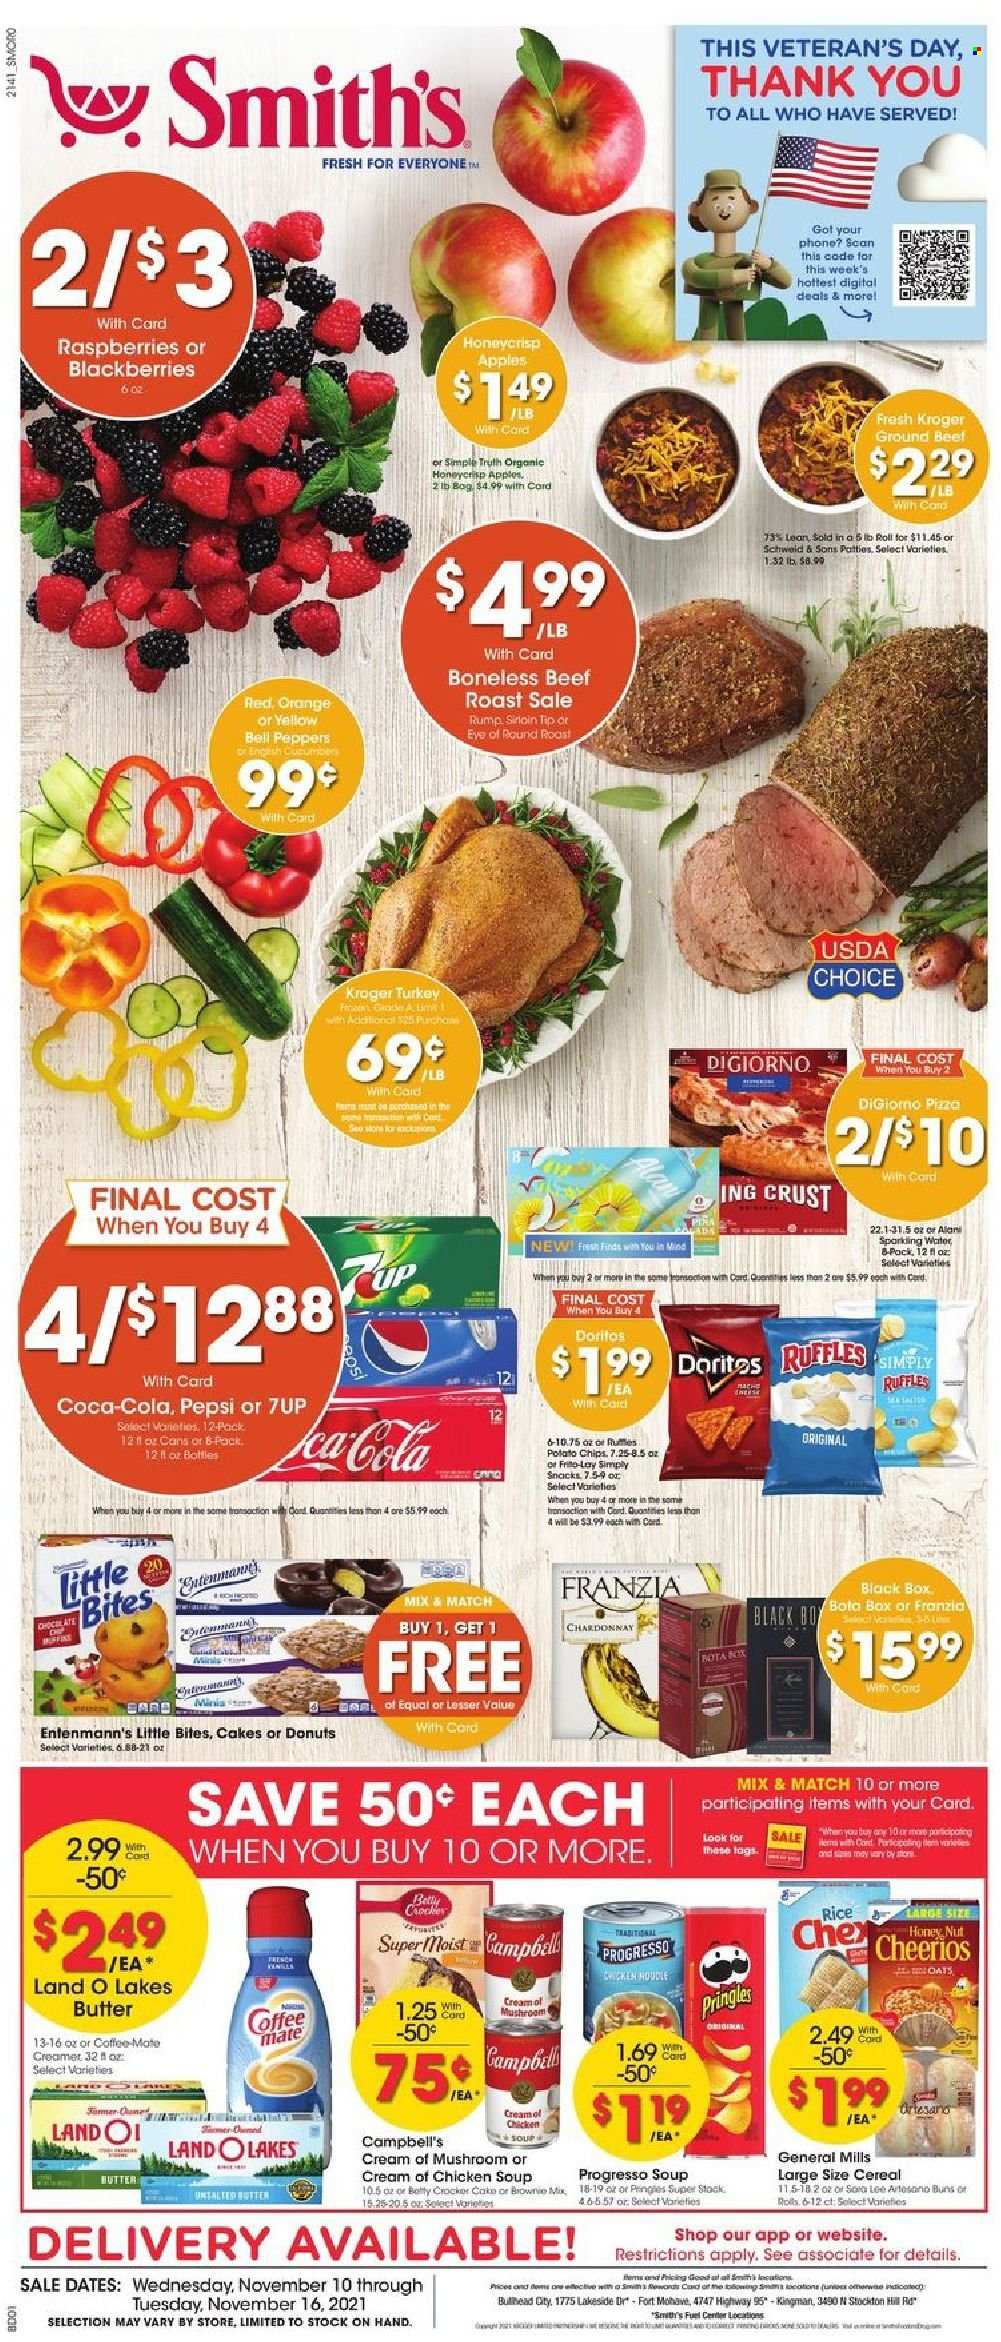 thumbnail - Smith's Flyer - 11/10/2021 - 11/16/2021 - Sales products - cake, buns, donut, Entenmann's, brownie mix, bell peppers, cucumber, peppers, apples, blackberries, oranges, cod, Campbell's, pizza, chicken soup, Progresso, Coffee-Mate, butter, creamer, snack, Little Bites, Doritos, potato chips, Pringles, chips, Smith's, Ruffles, oats, cereals, Cheerios, rice, Coca-Cola, Pepsi, 7UP, white wine, Chardonnay, wine, beef meat, ground beef, eye of round, roast beef. Page 1.